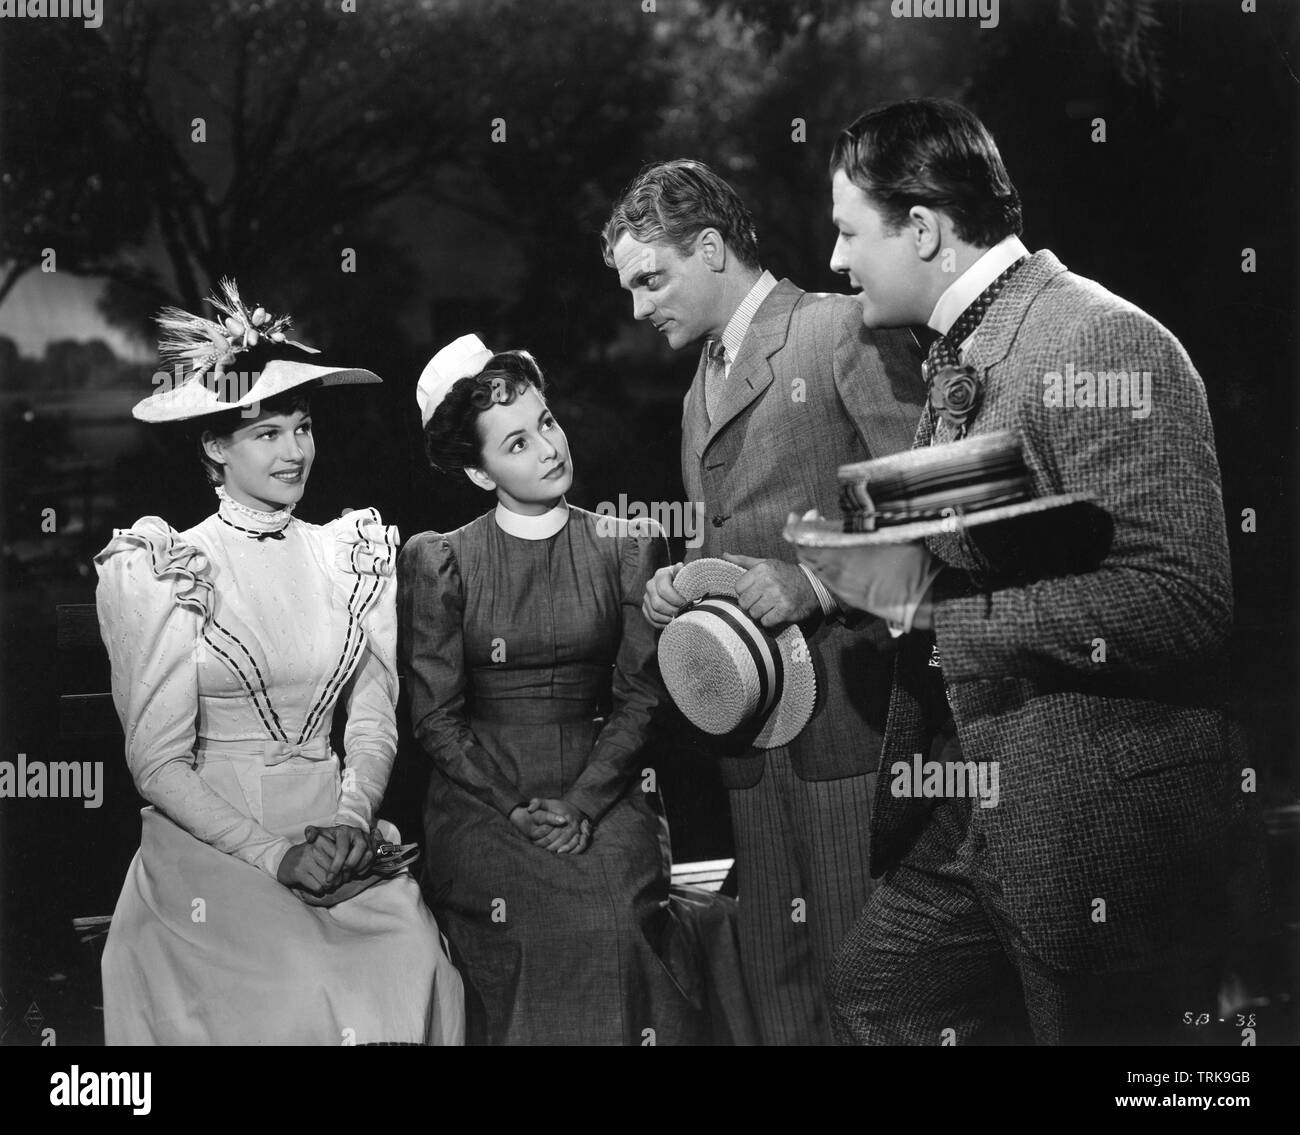 RITA HAYWORTH OLIVIA de HAVILLAND JAMES CAGNEY and JACK CARSON in THE STRAWBERRY BLONDE 1941 director Raoul Walsh Warner Bros. Stock Photo